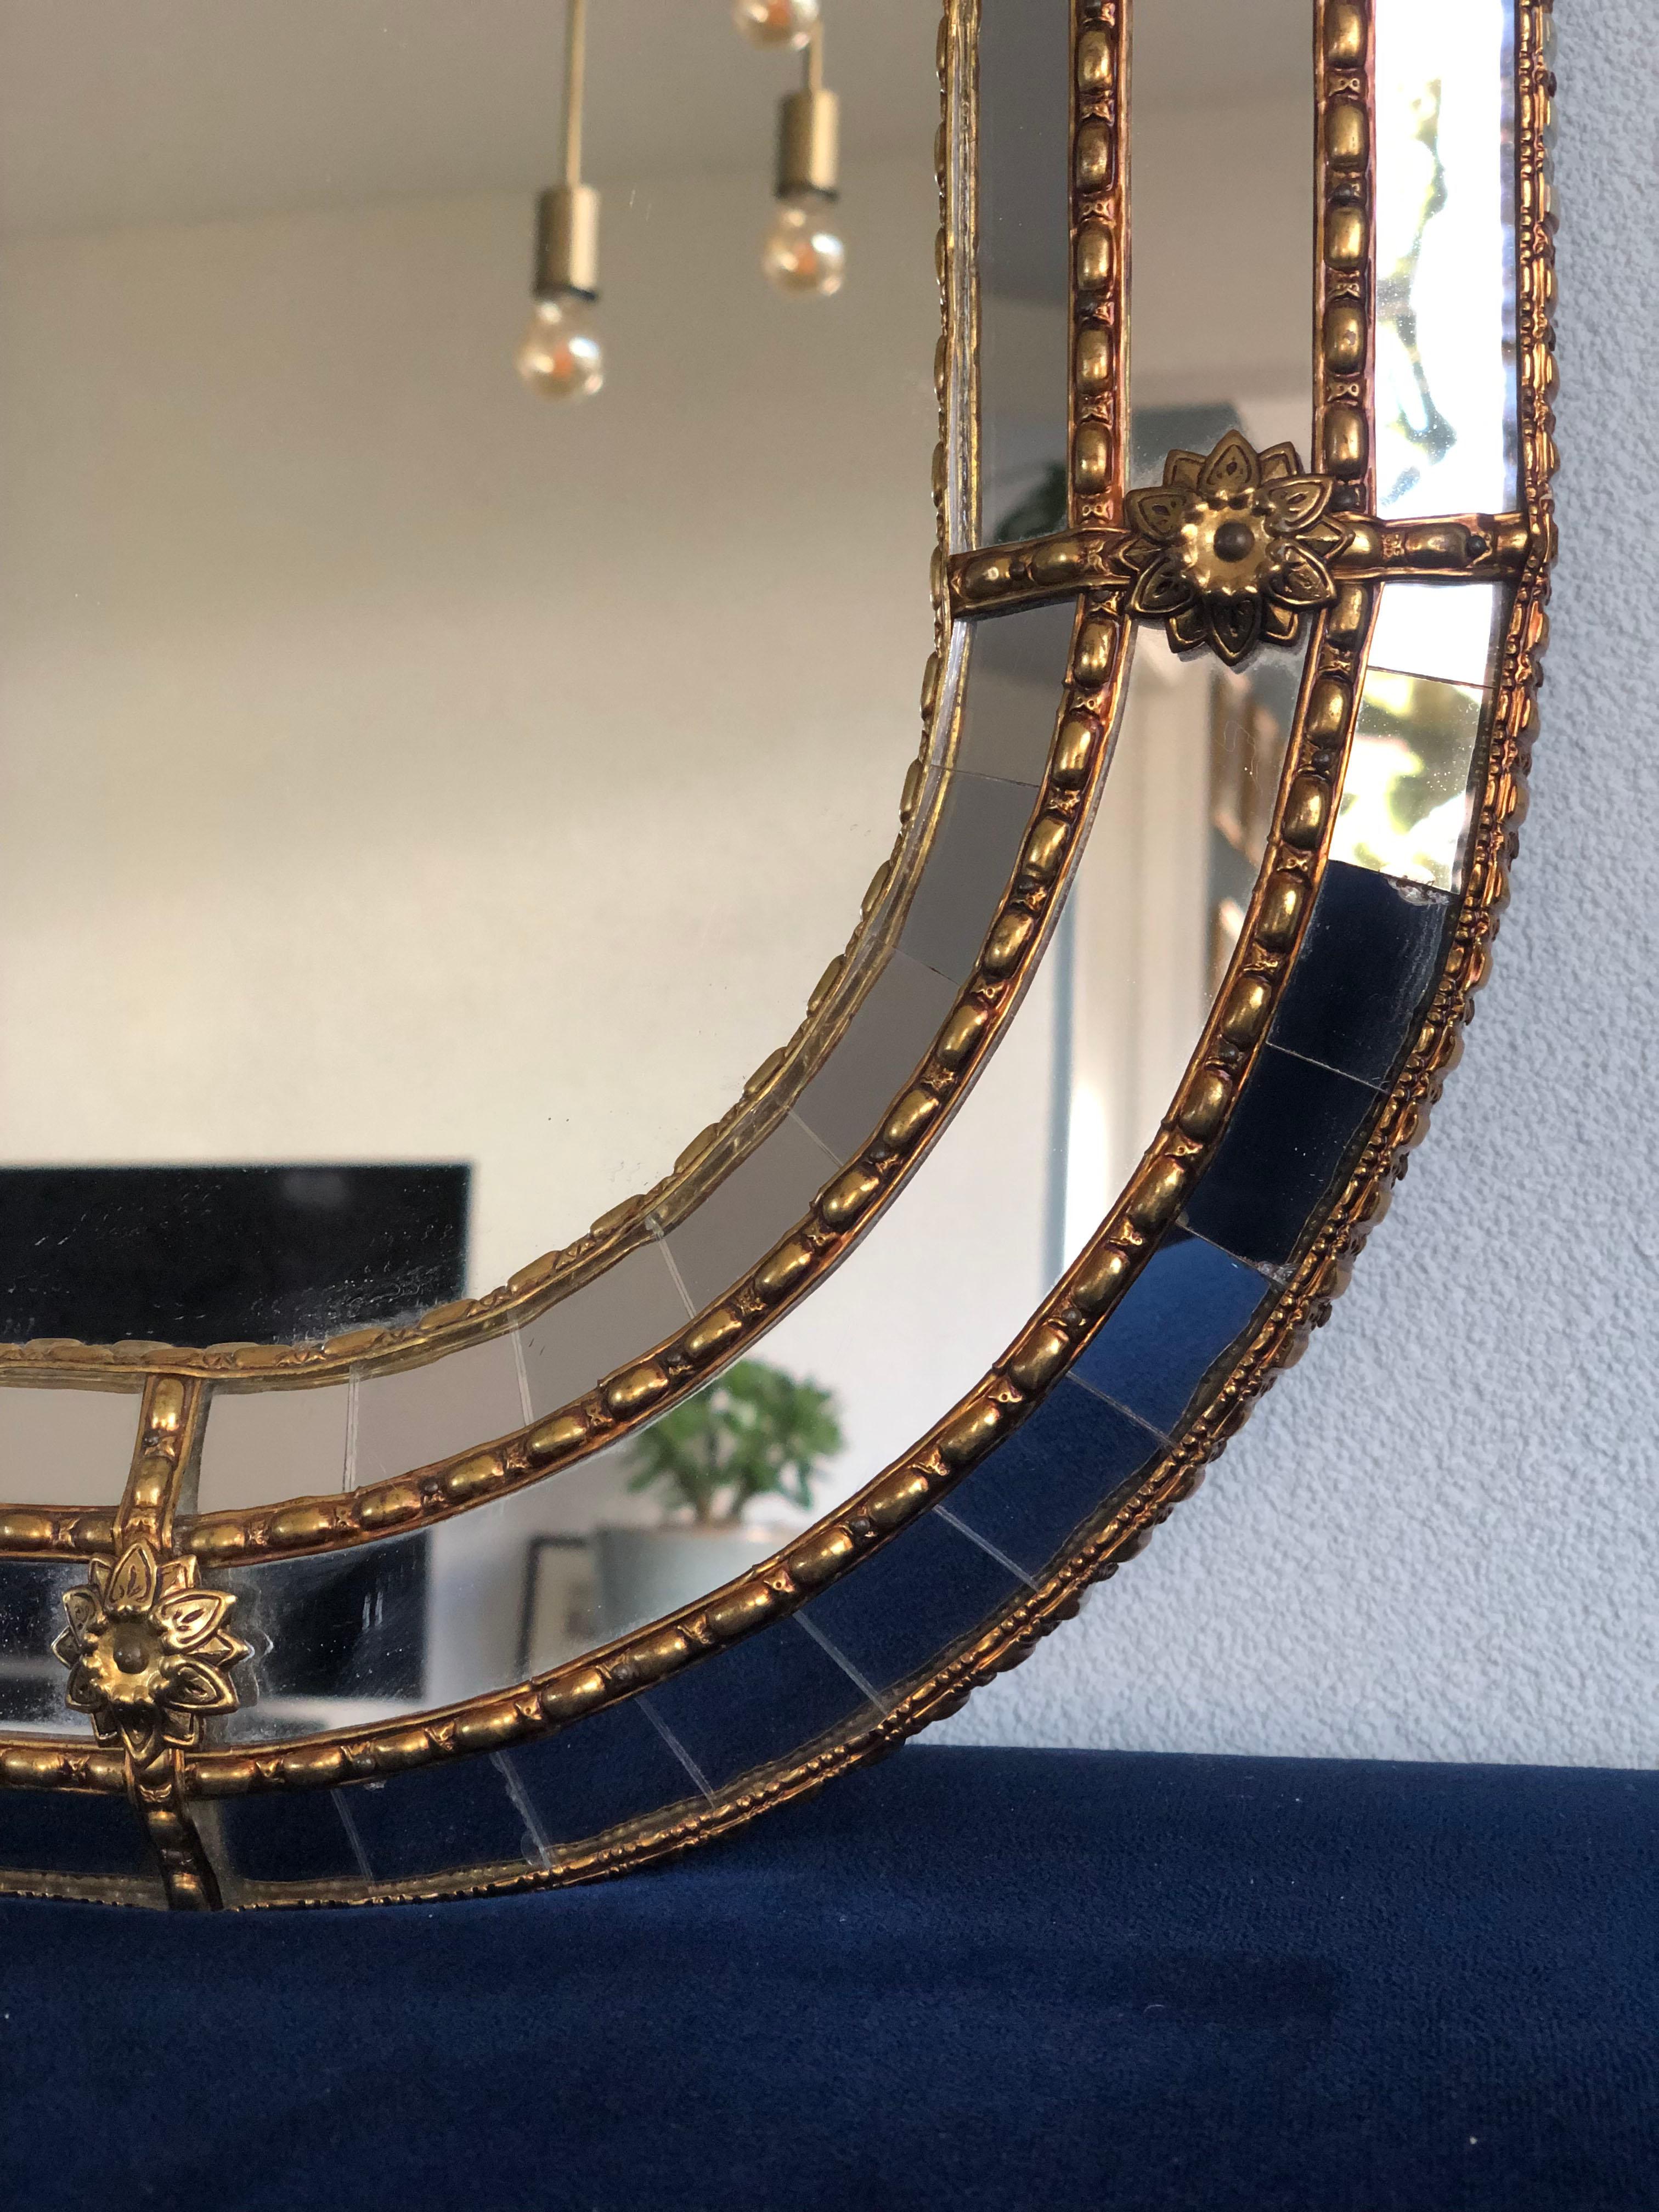 Beautiful handmade Venetian mirror from Spain, 1990s. The frame with oval corners has cut glass panes across the entire width, which is held together by a brass strip. The mosaic trapezoidal mirror has a brass flower at each corner. 

Object: